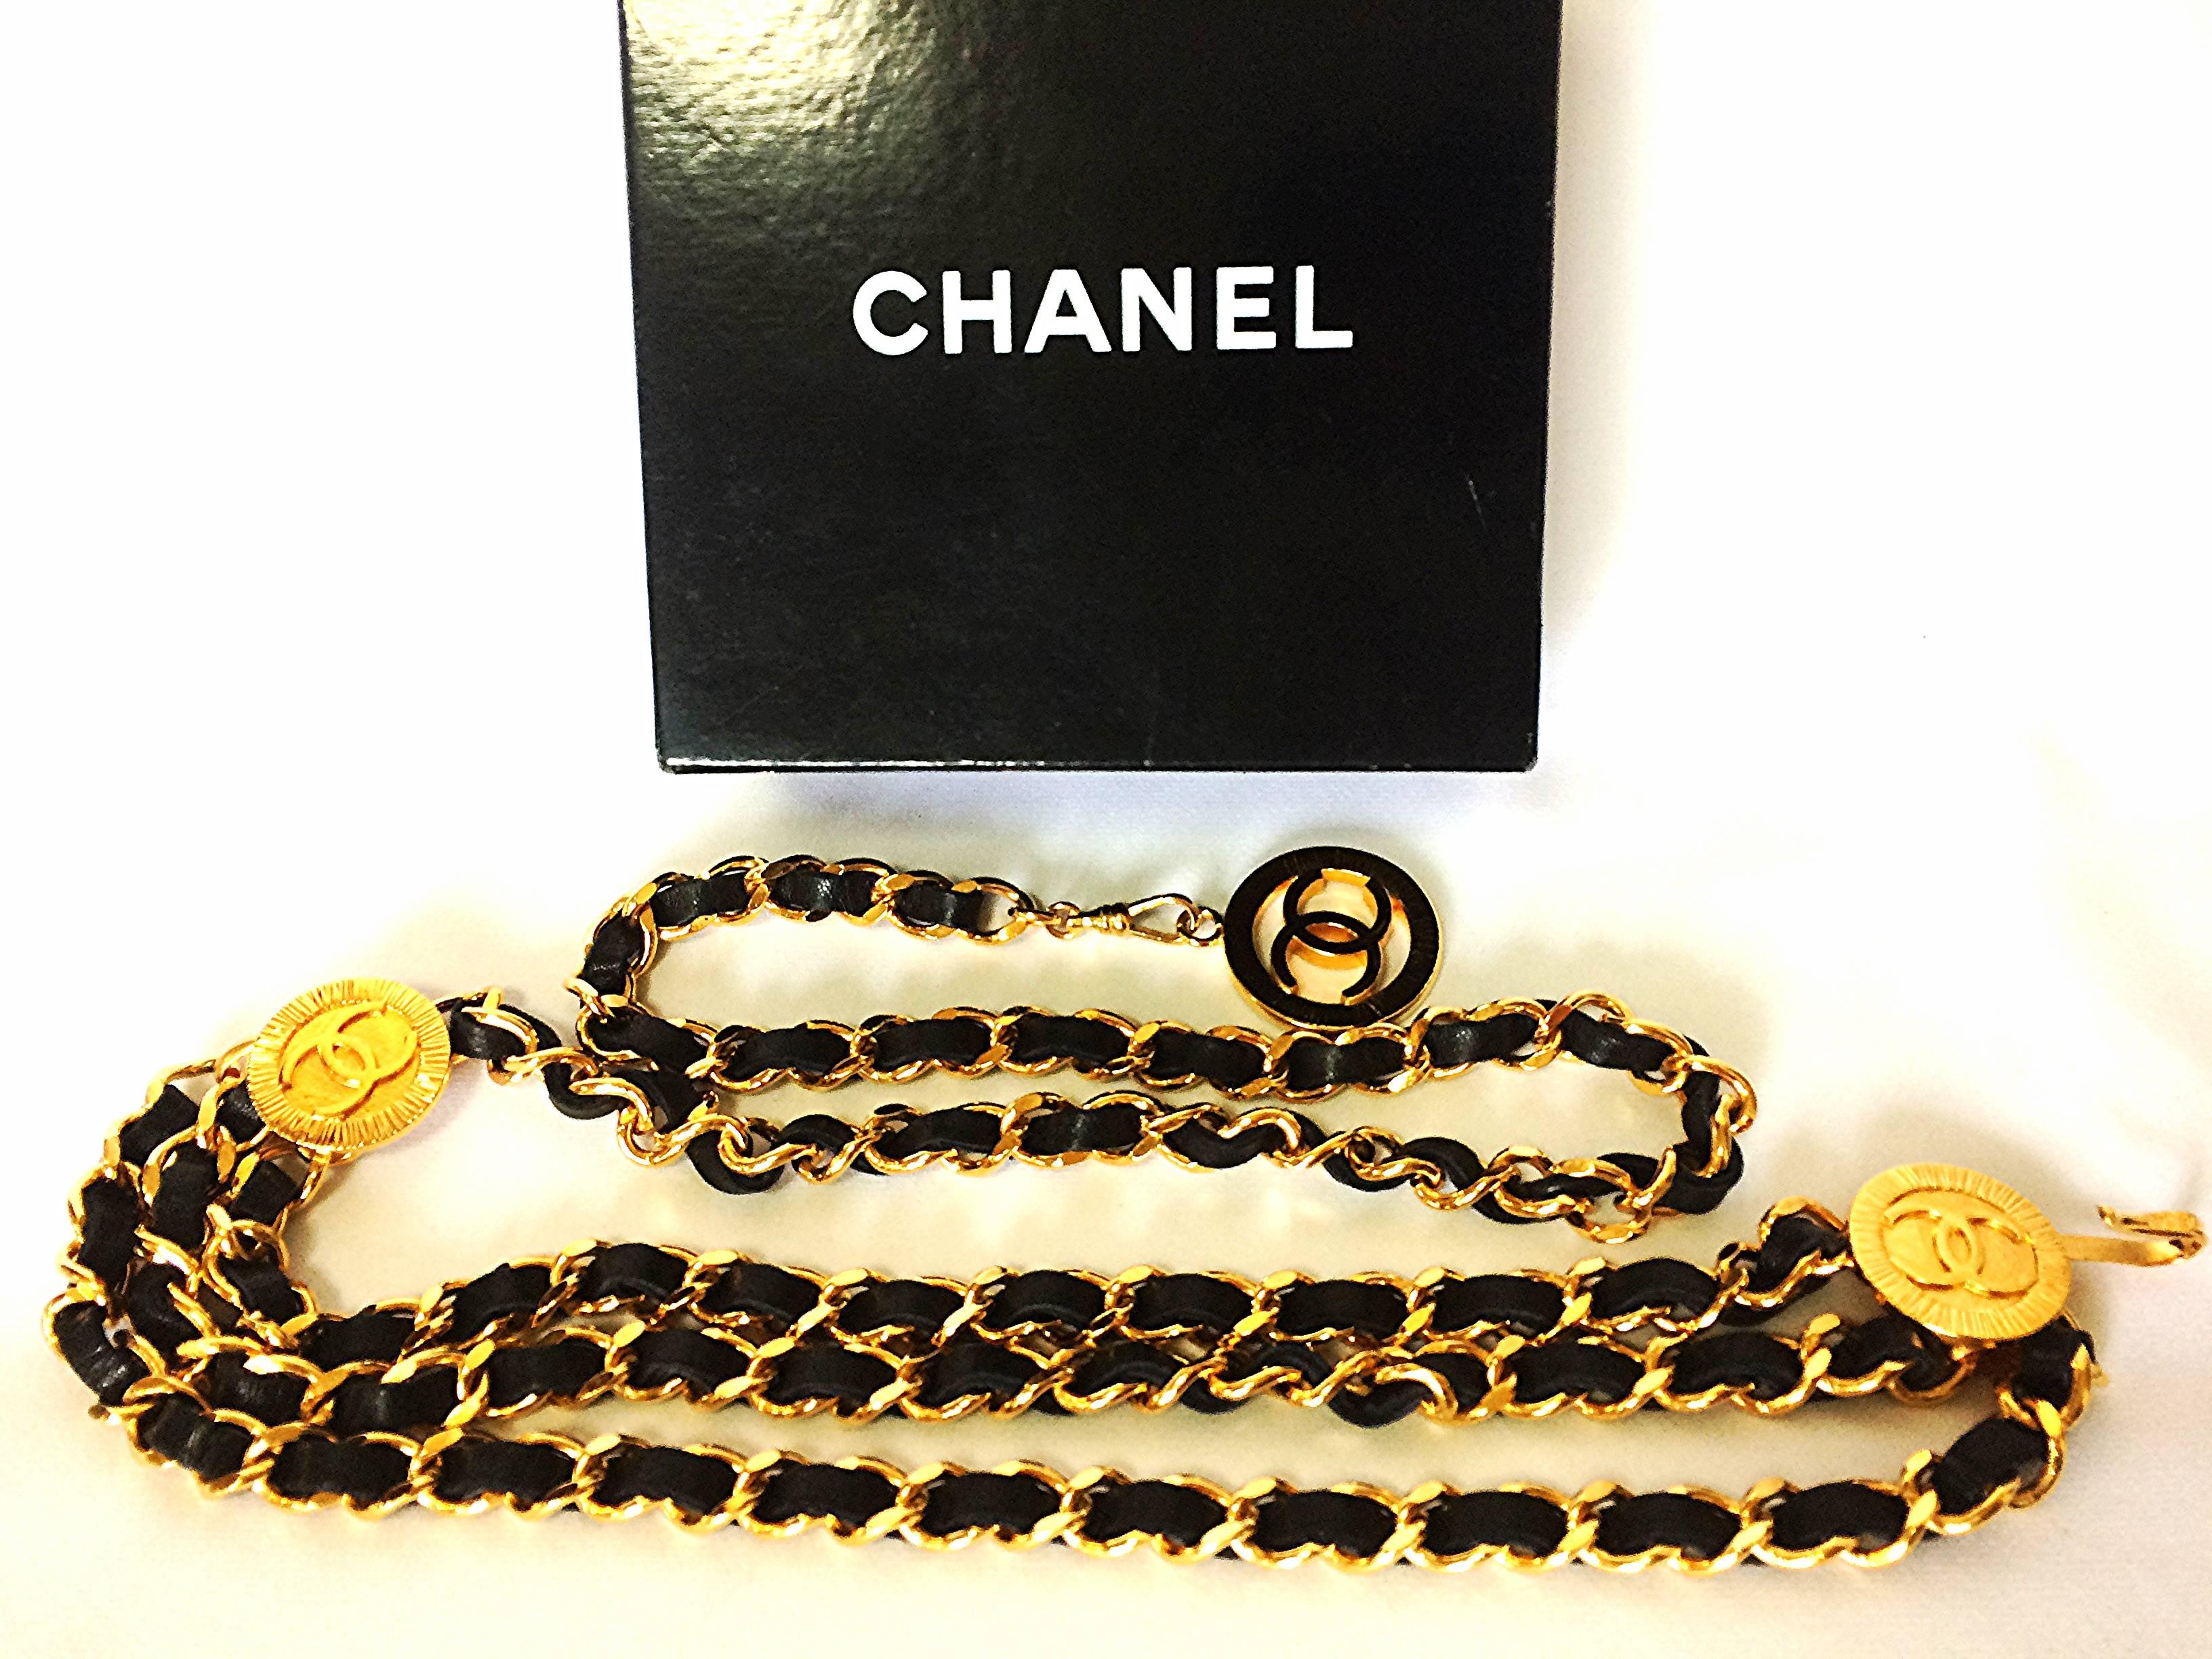 MINT. 1980's Vintage CHANEL 3 layered black leather and golden chain belt 4